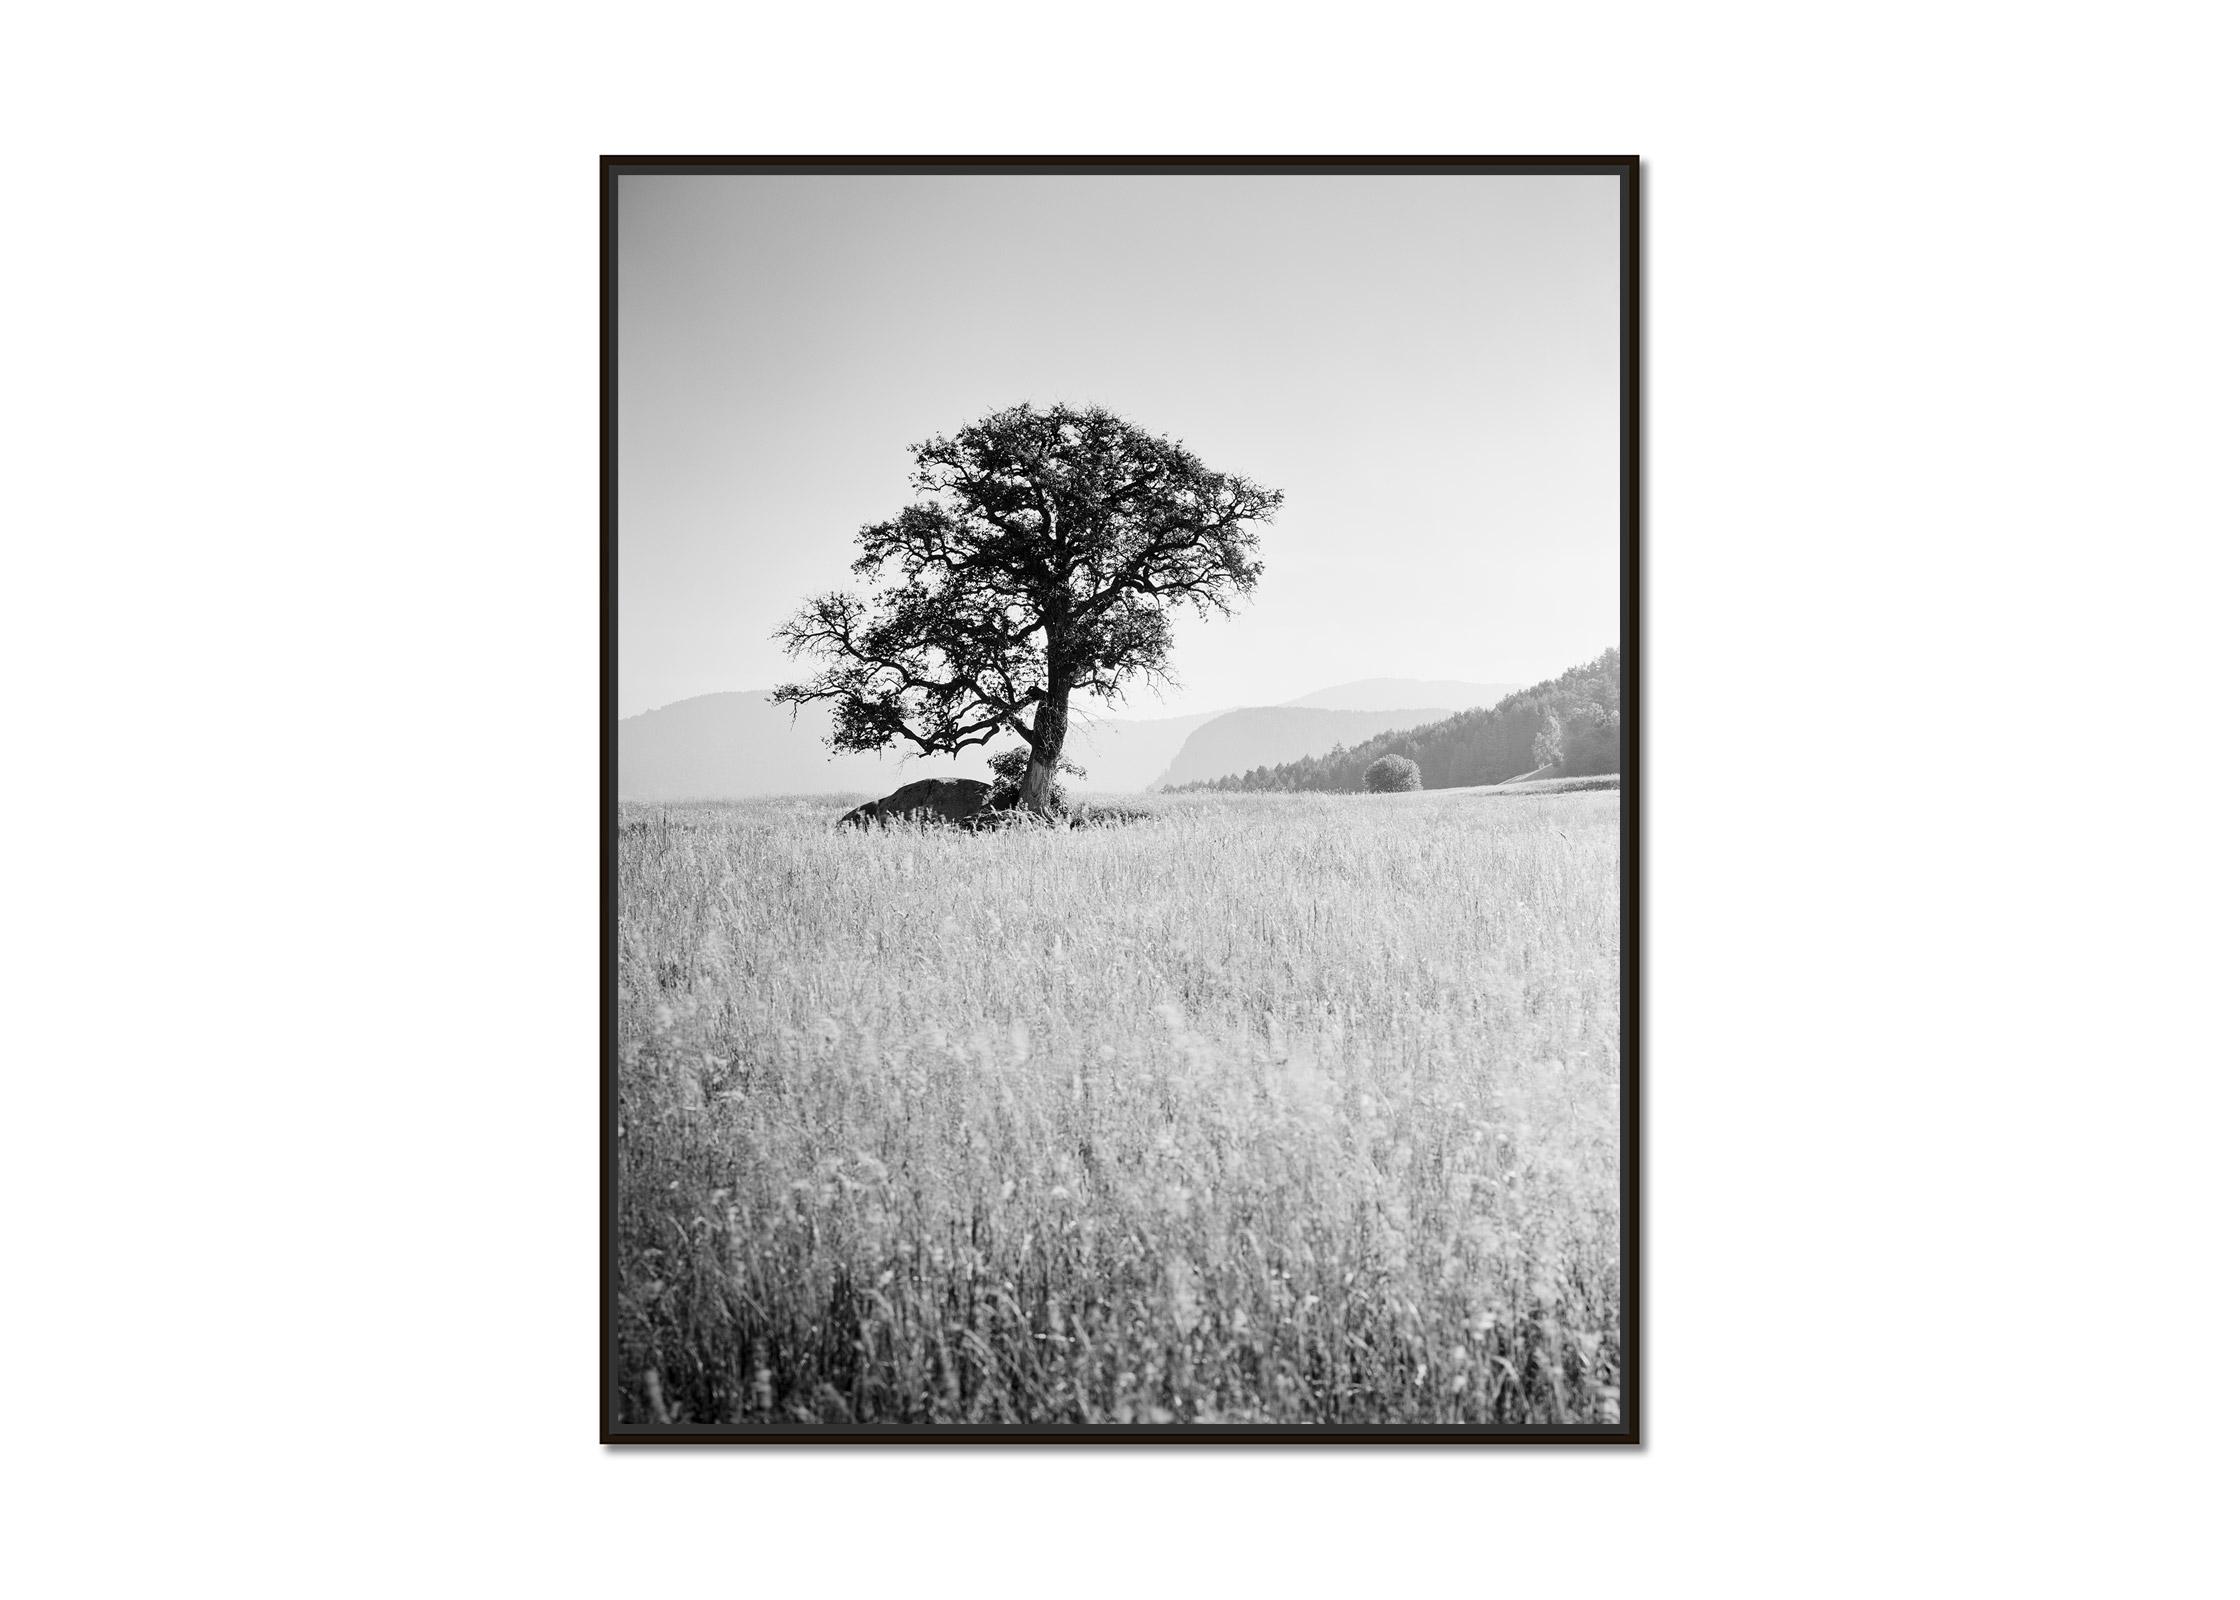 Morning Sun, single tree, Seiser Alm, black and white landscape, art photography - Photograph by Gerald Berghammer